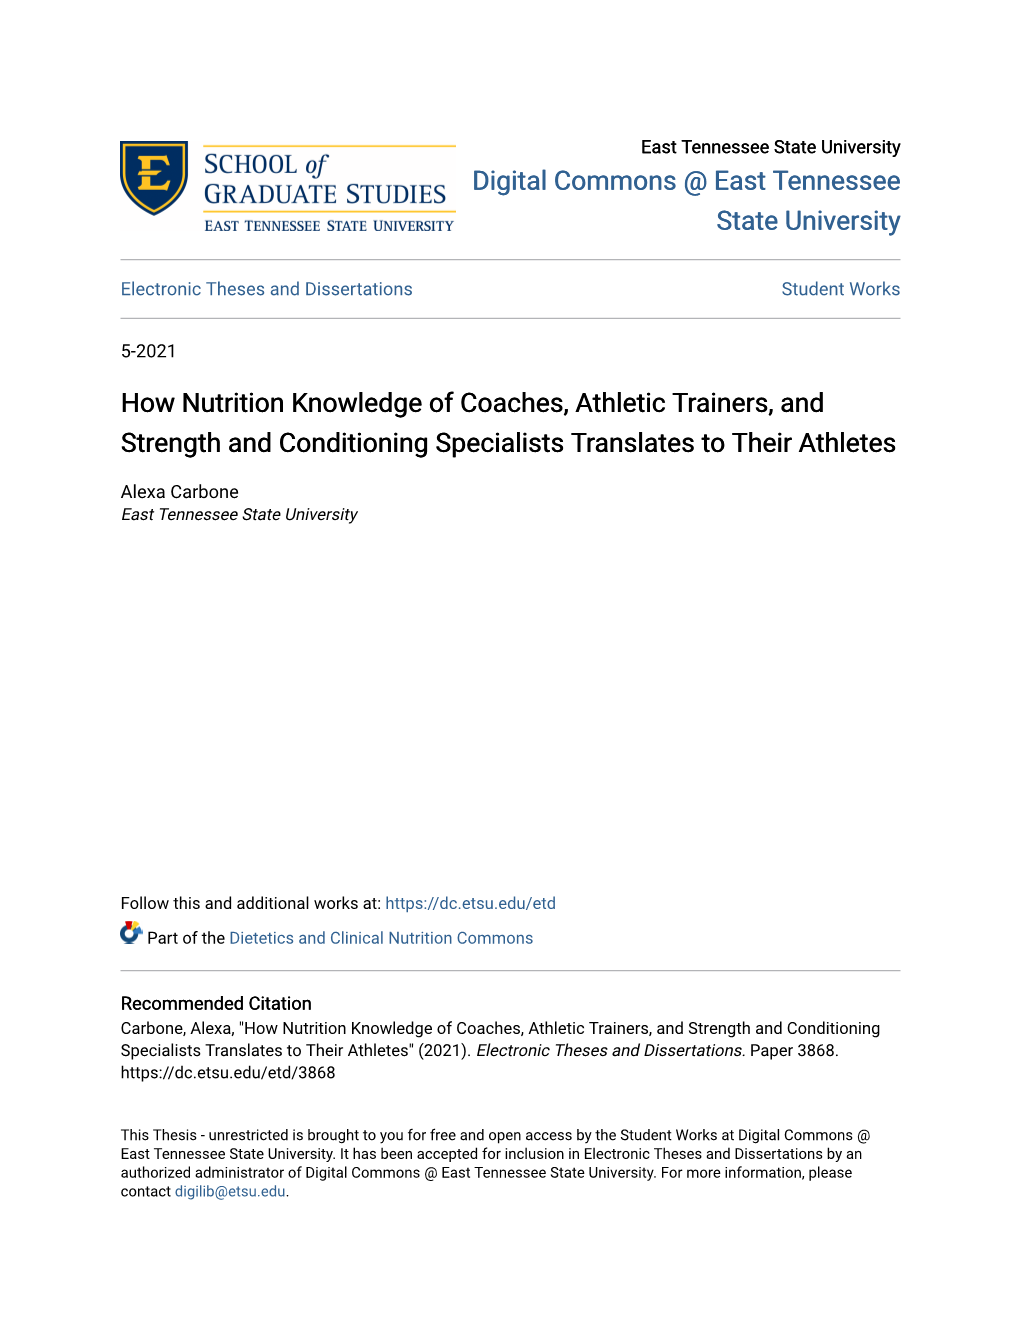 How Nutrition Knowledge of Coaches, Athletic Trainers, and Strength and Conditioning Specialists Translates to Their Athletes